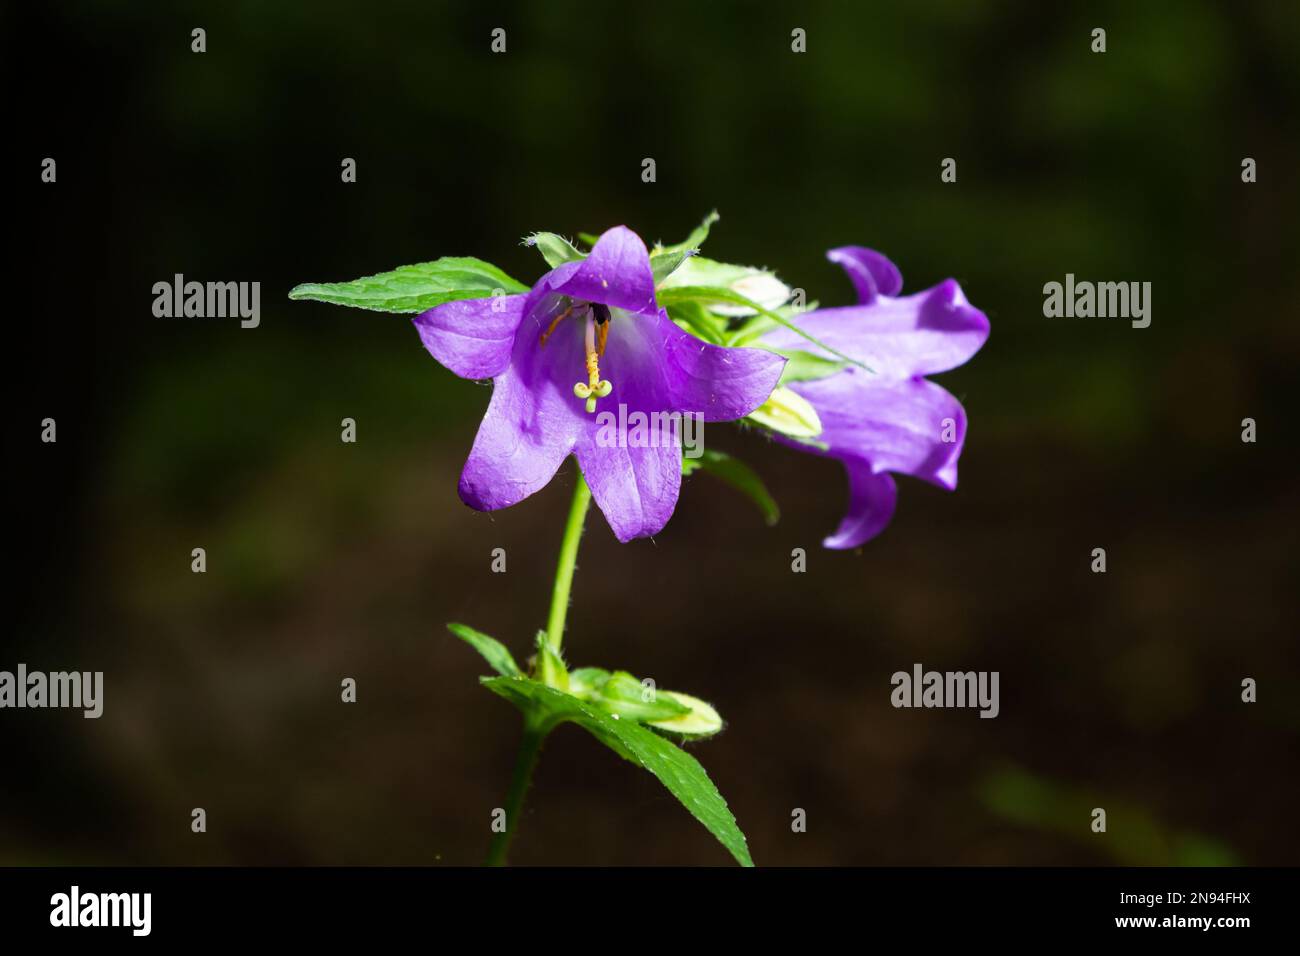 Close-up of flowering nettle-leaved bellflower on dark blurry natural background. Campanula trachelium. Beautiful detail of hairy violet bell shaped f Stock Photo